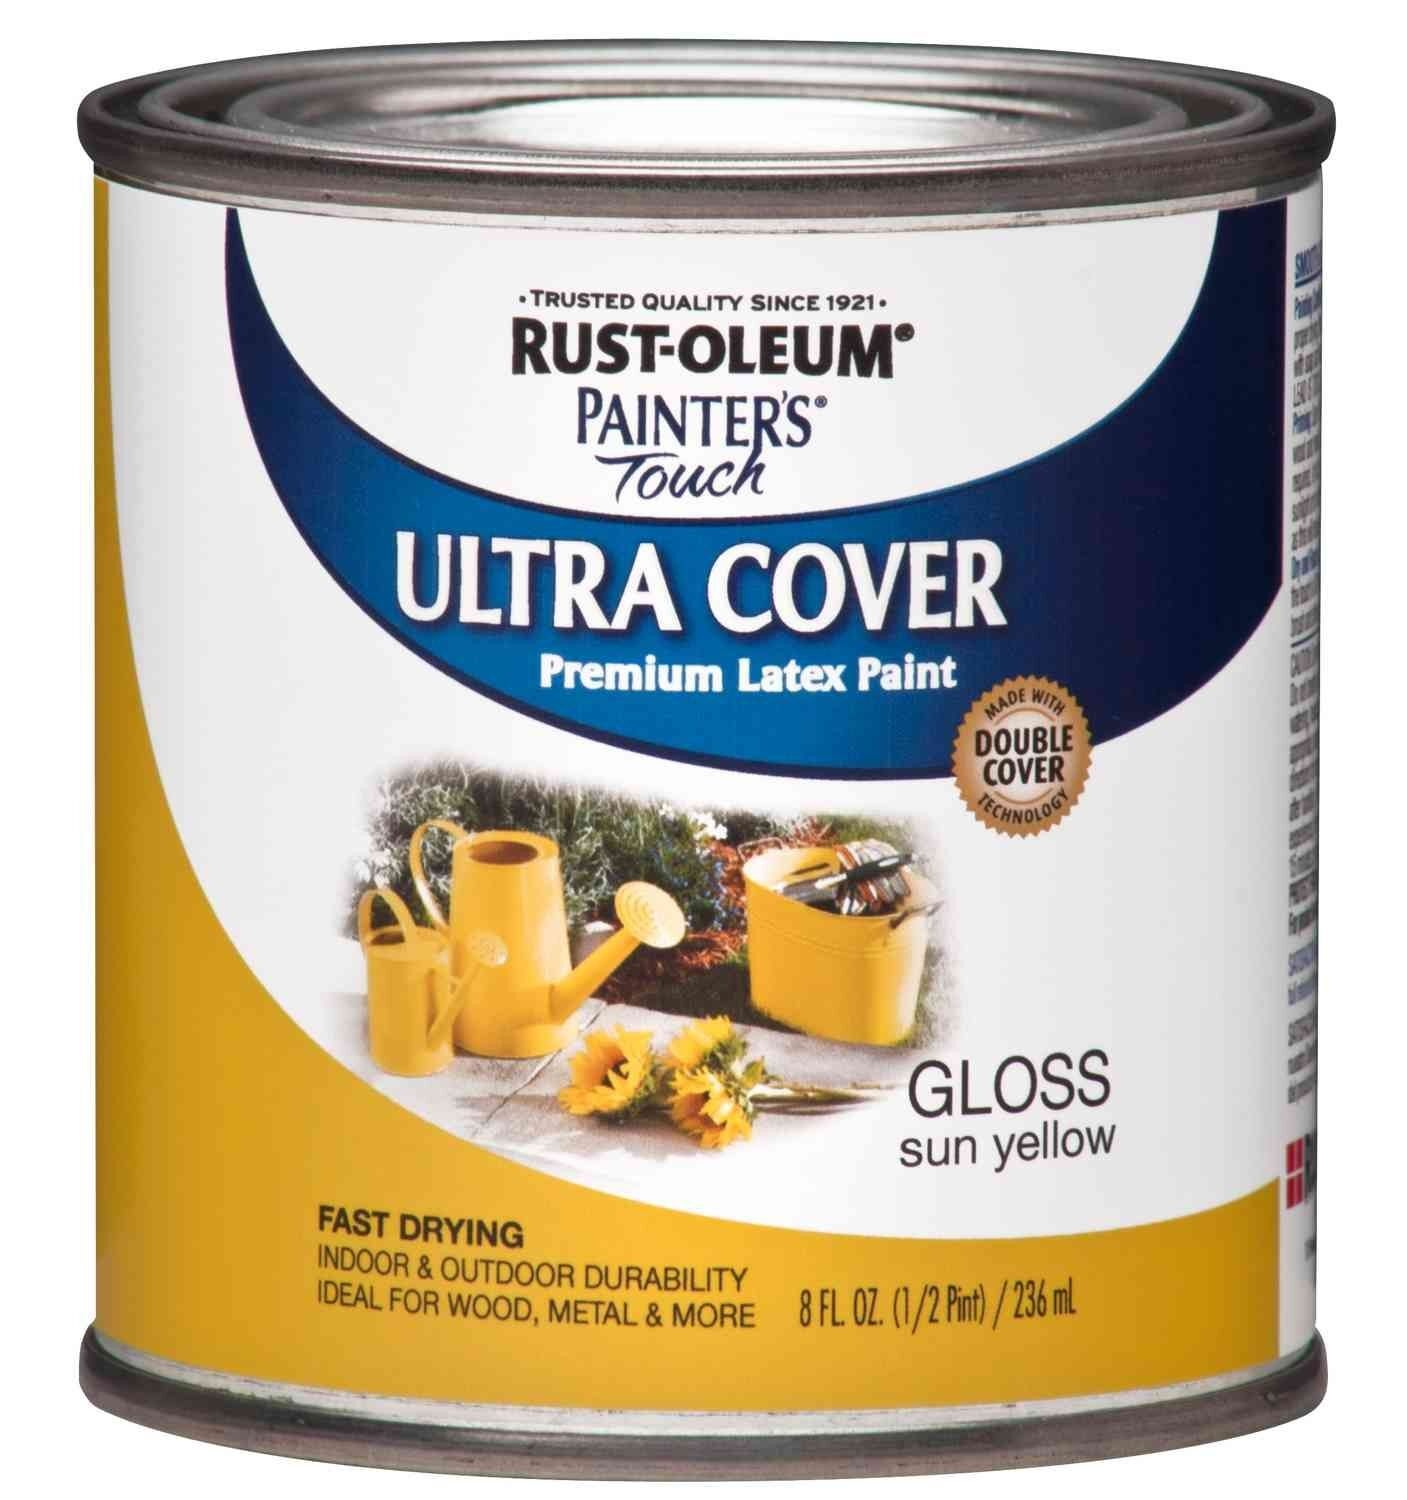 Painter's Touch Ultra Cover Premium Latex Paint